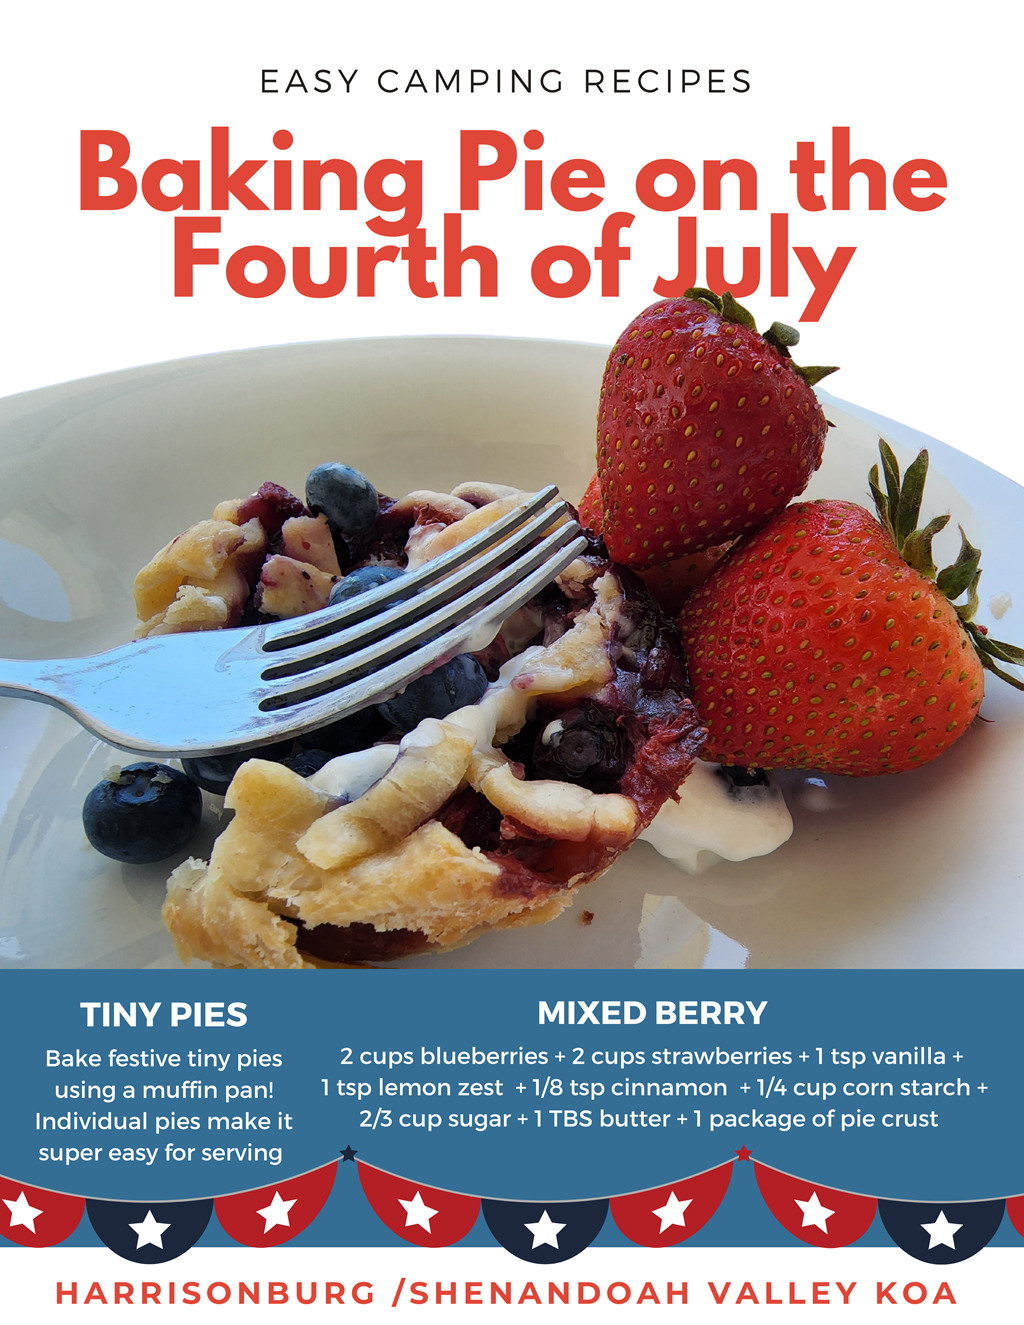 Baking Pie on the Fourth of July